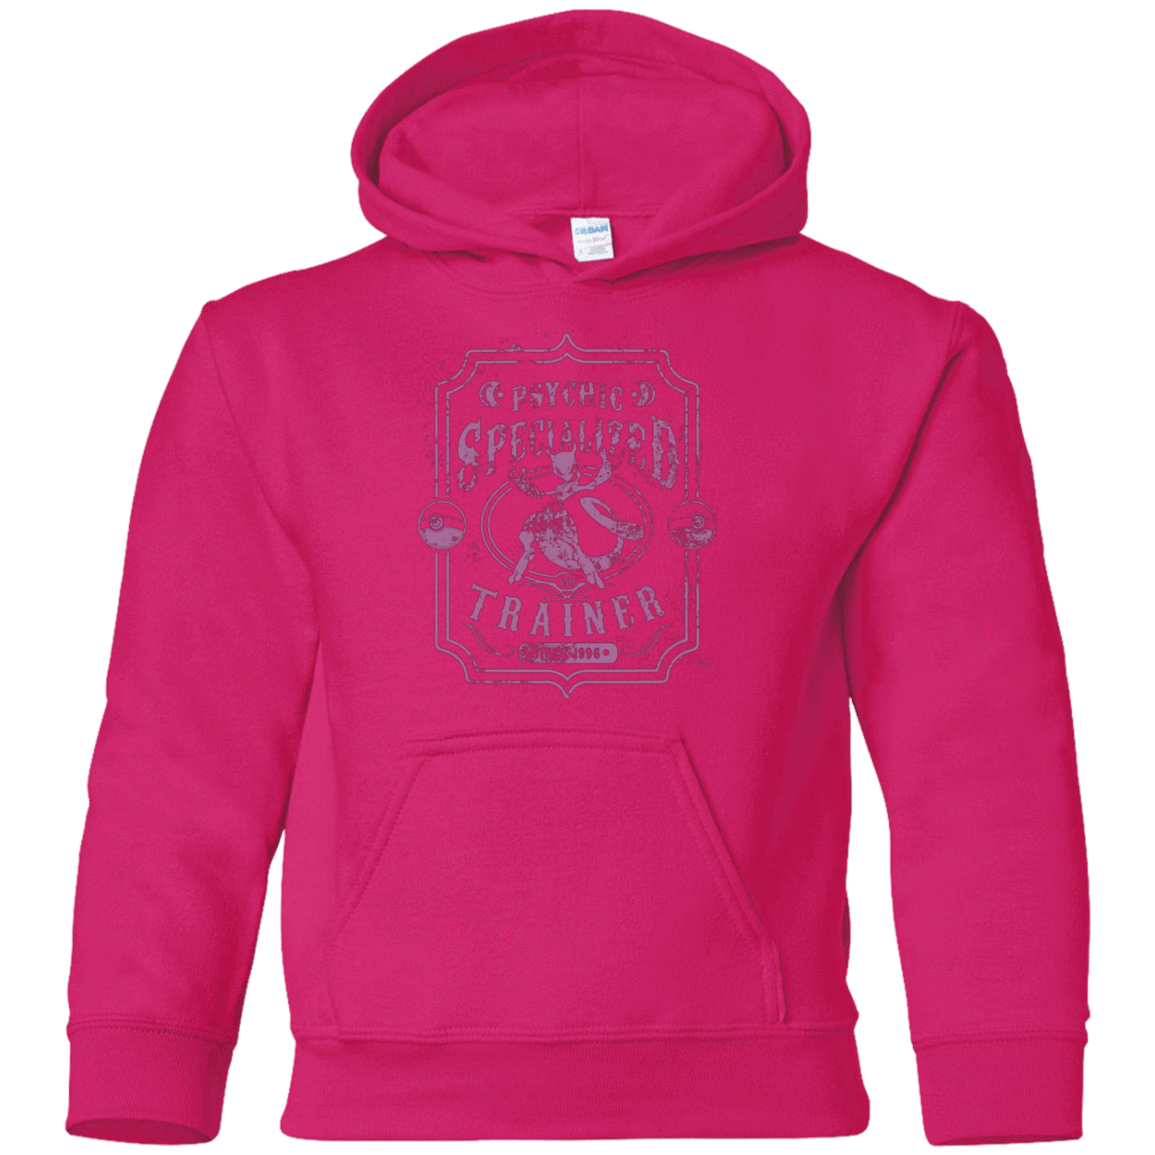 Sweatshirts Heliconia / YS Psychic Specialized Trainer 2 Youth Hoodie